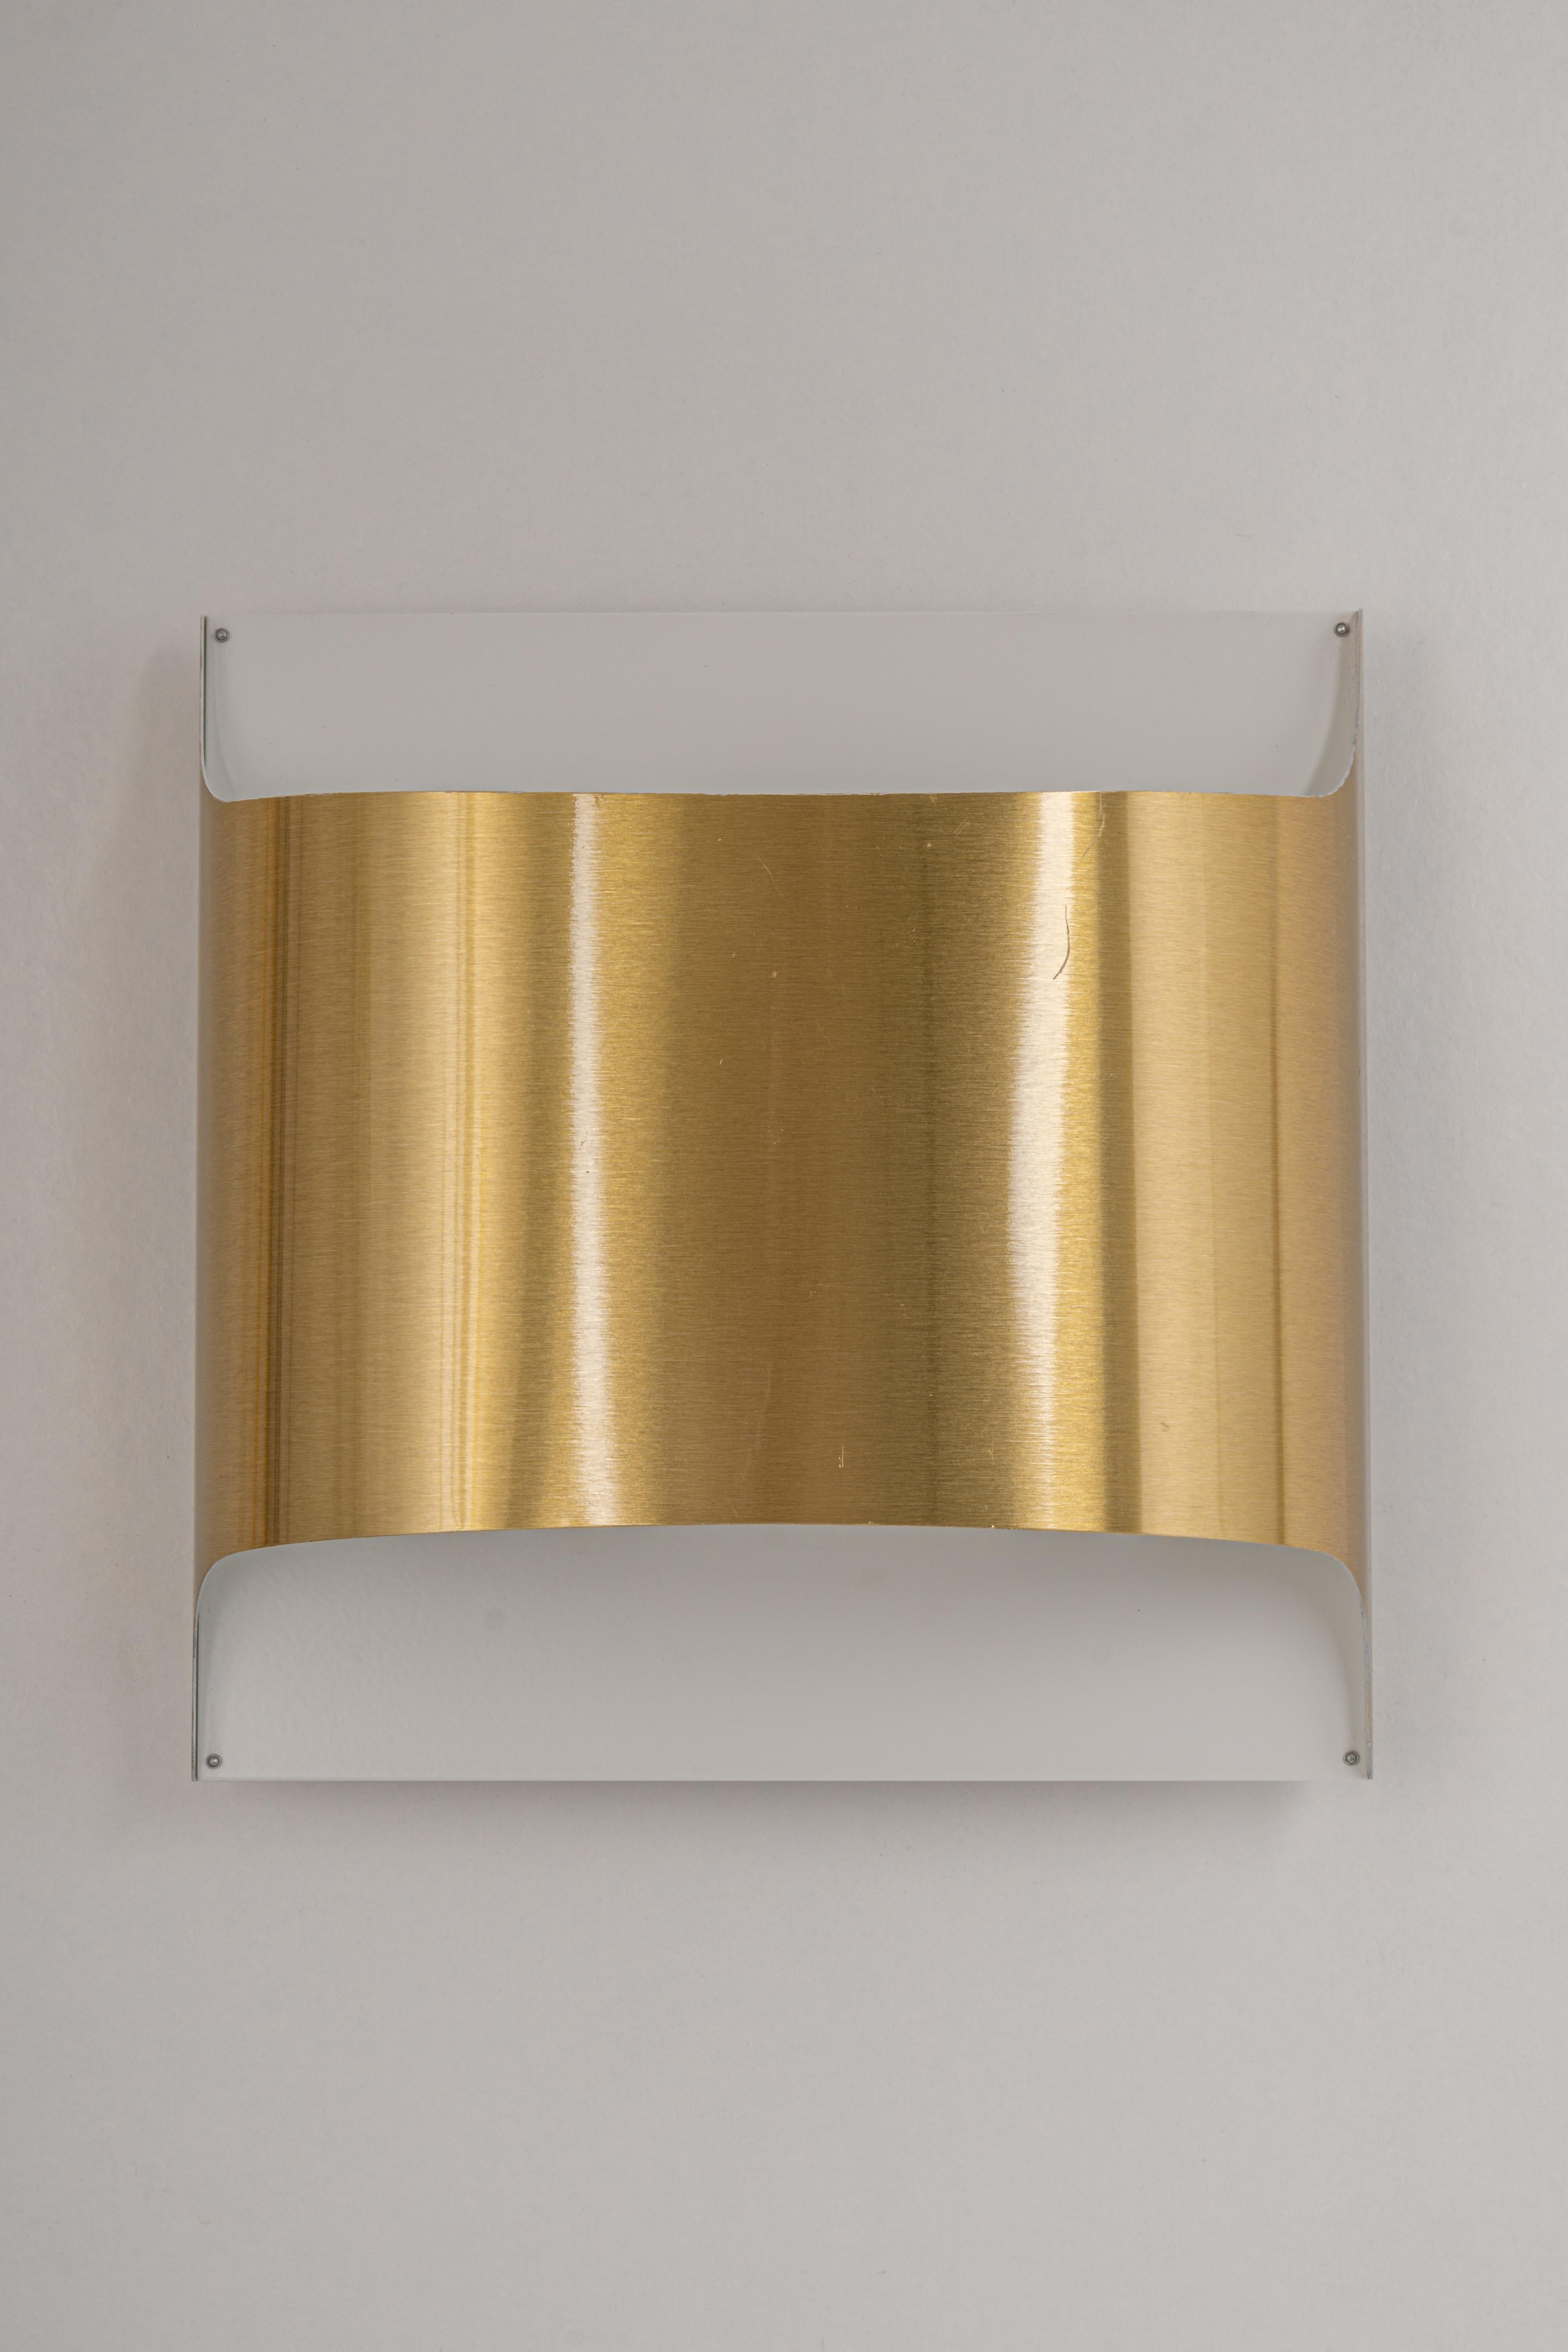 Brass 1 of 2 Wall Sconces Designed by Staff, Germany, 1970s For Sale